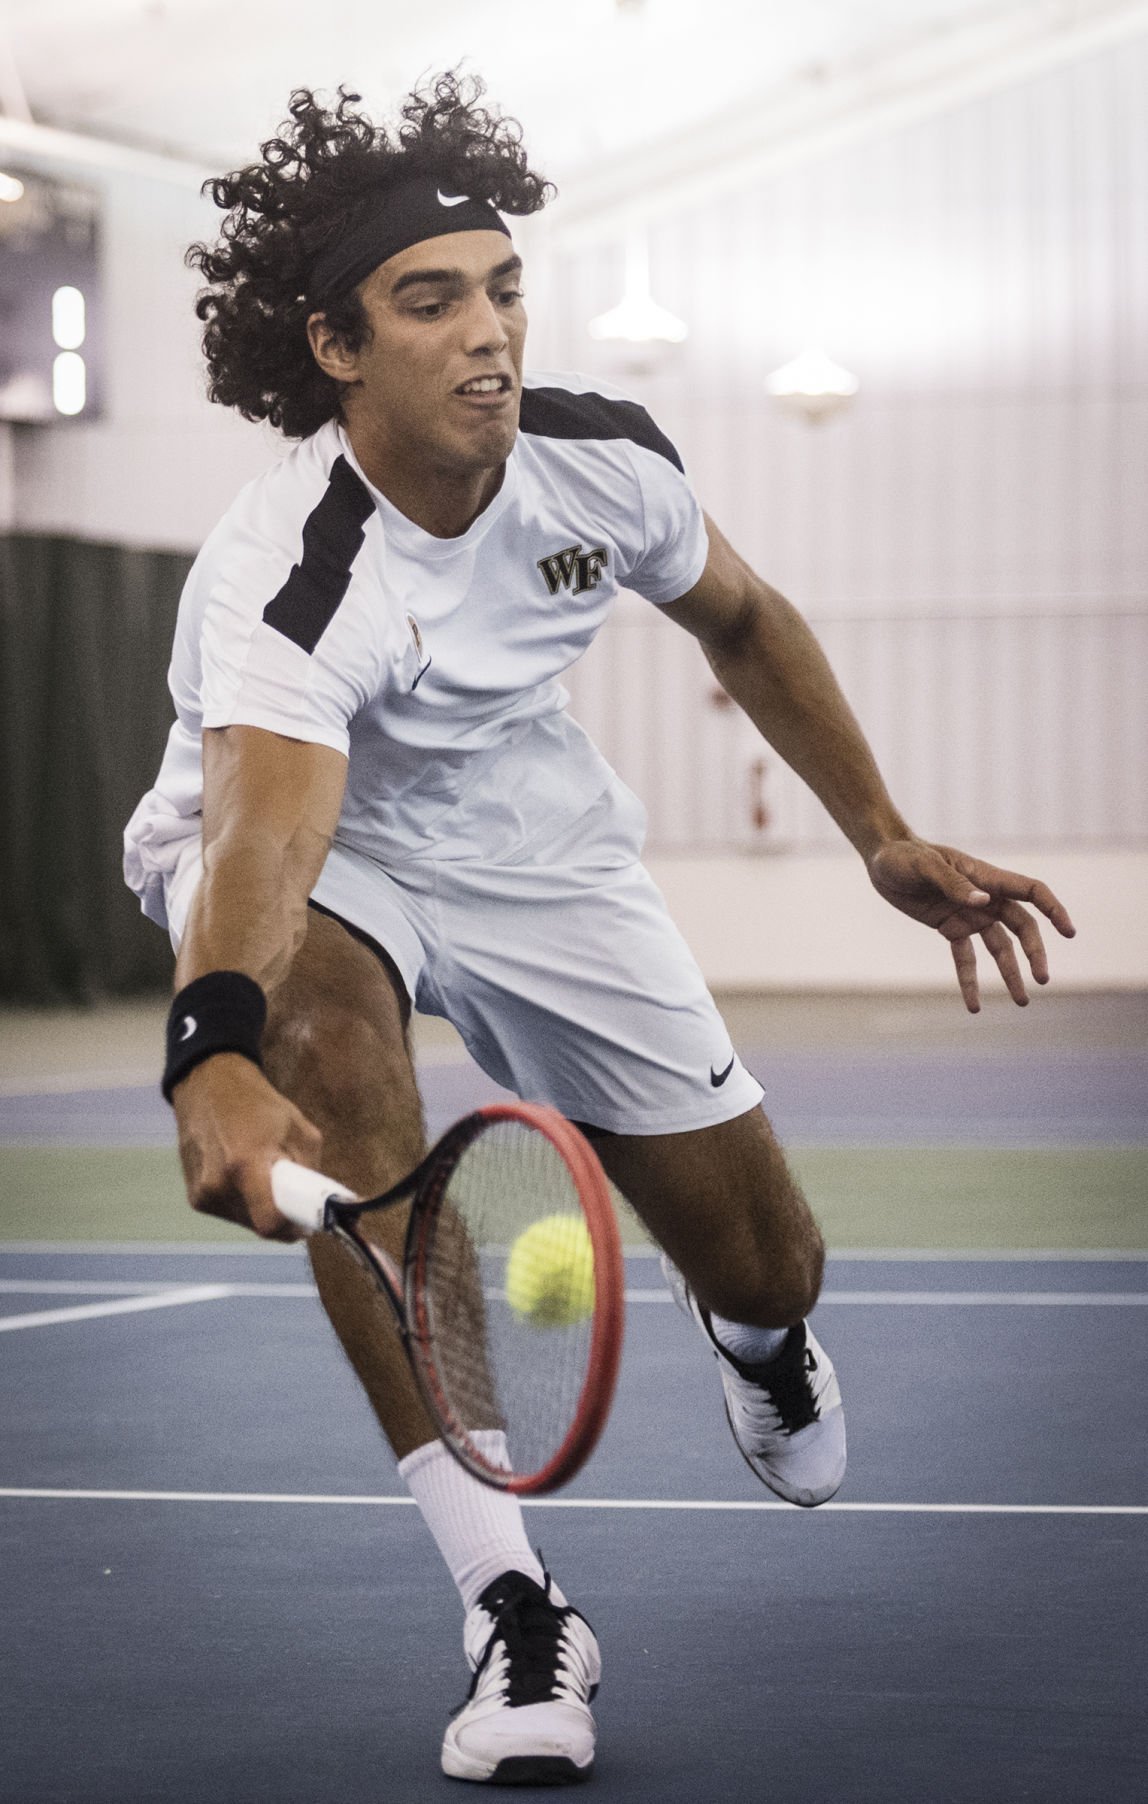 Deacons' men's tennis routs UNC Wilmington in first round of NCAA